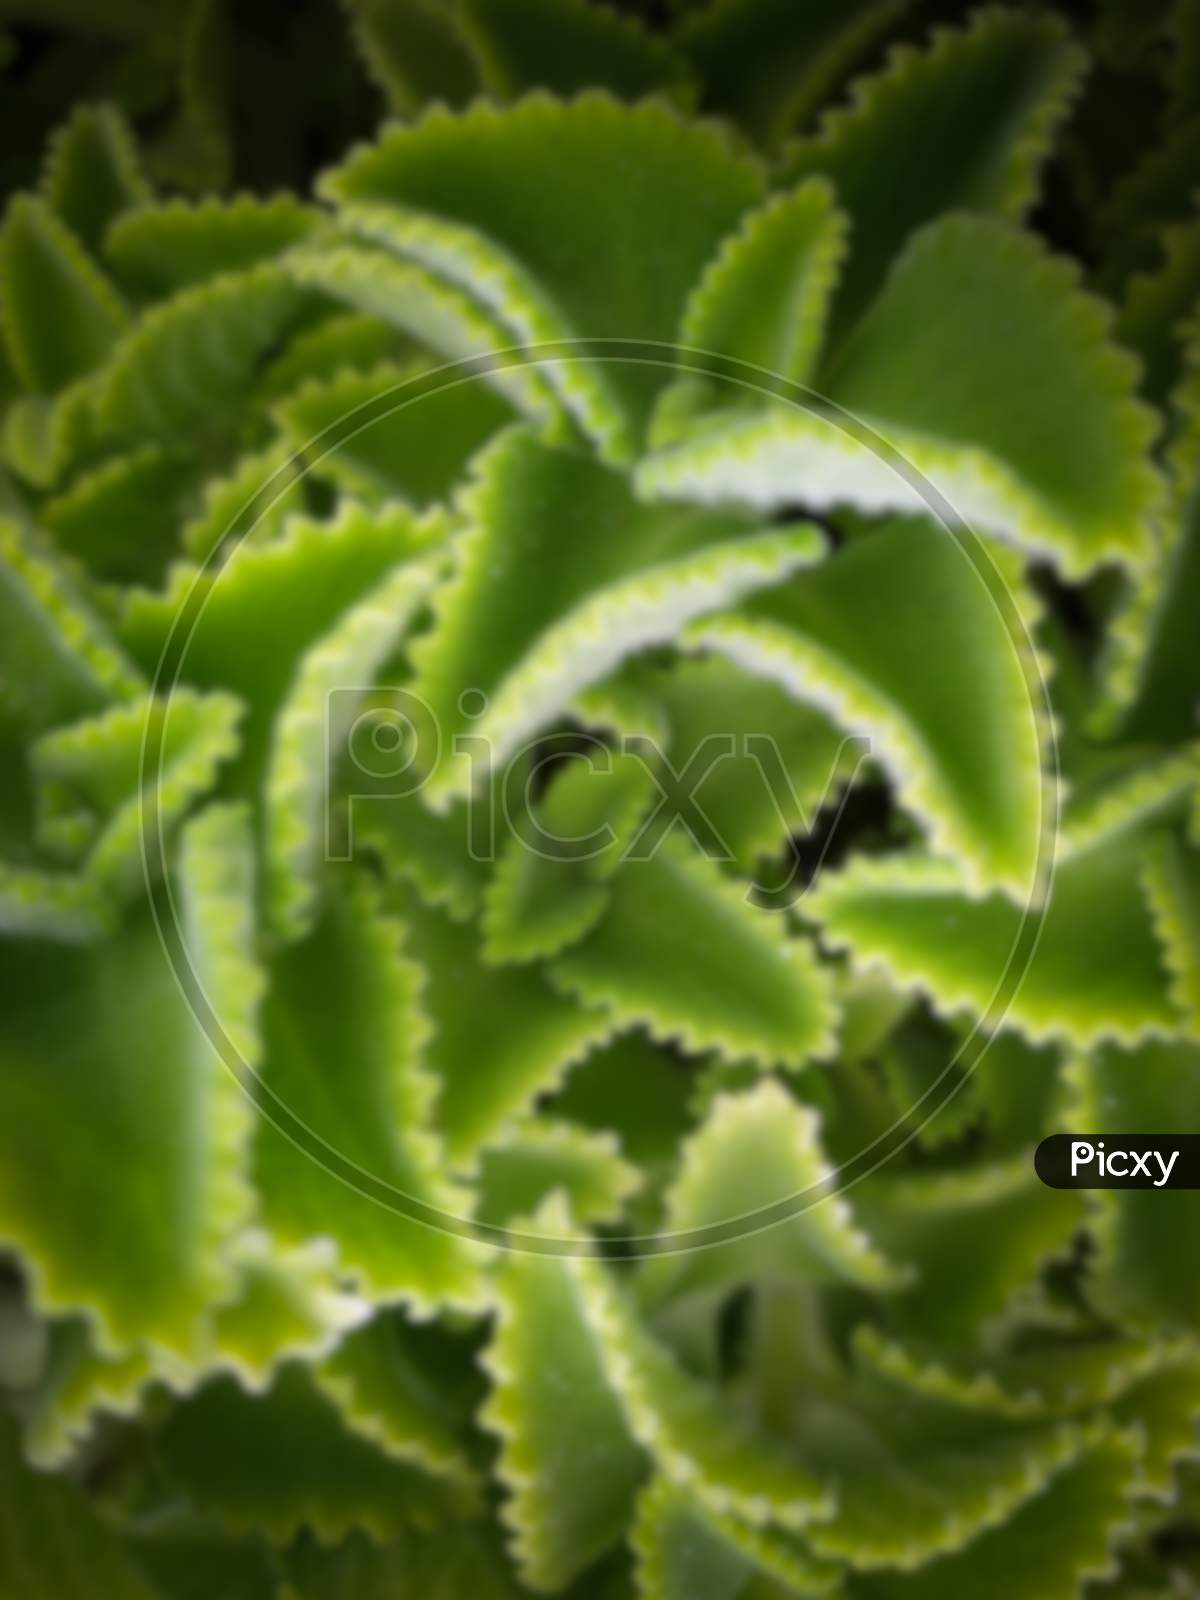 spongy leaves of celery plant, related blur.